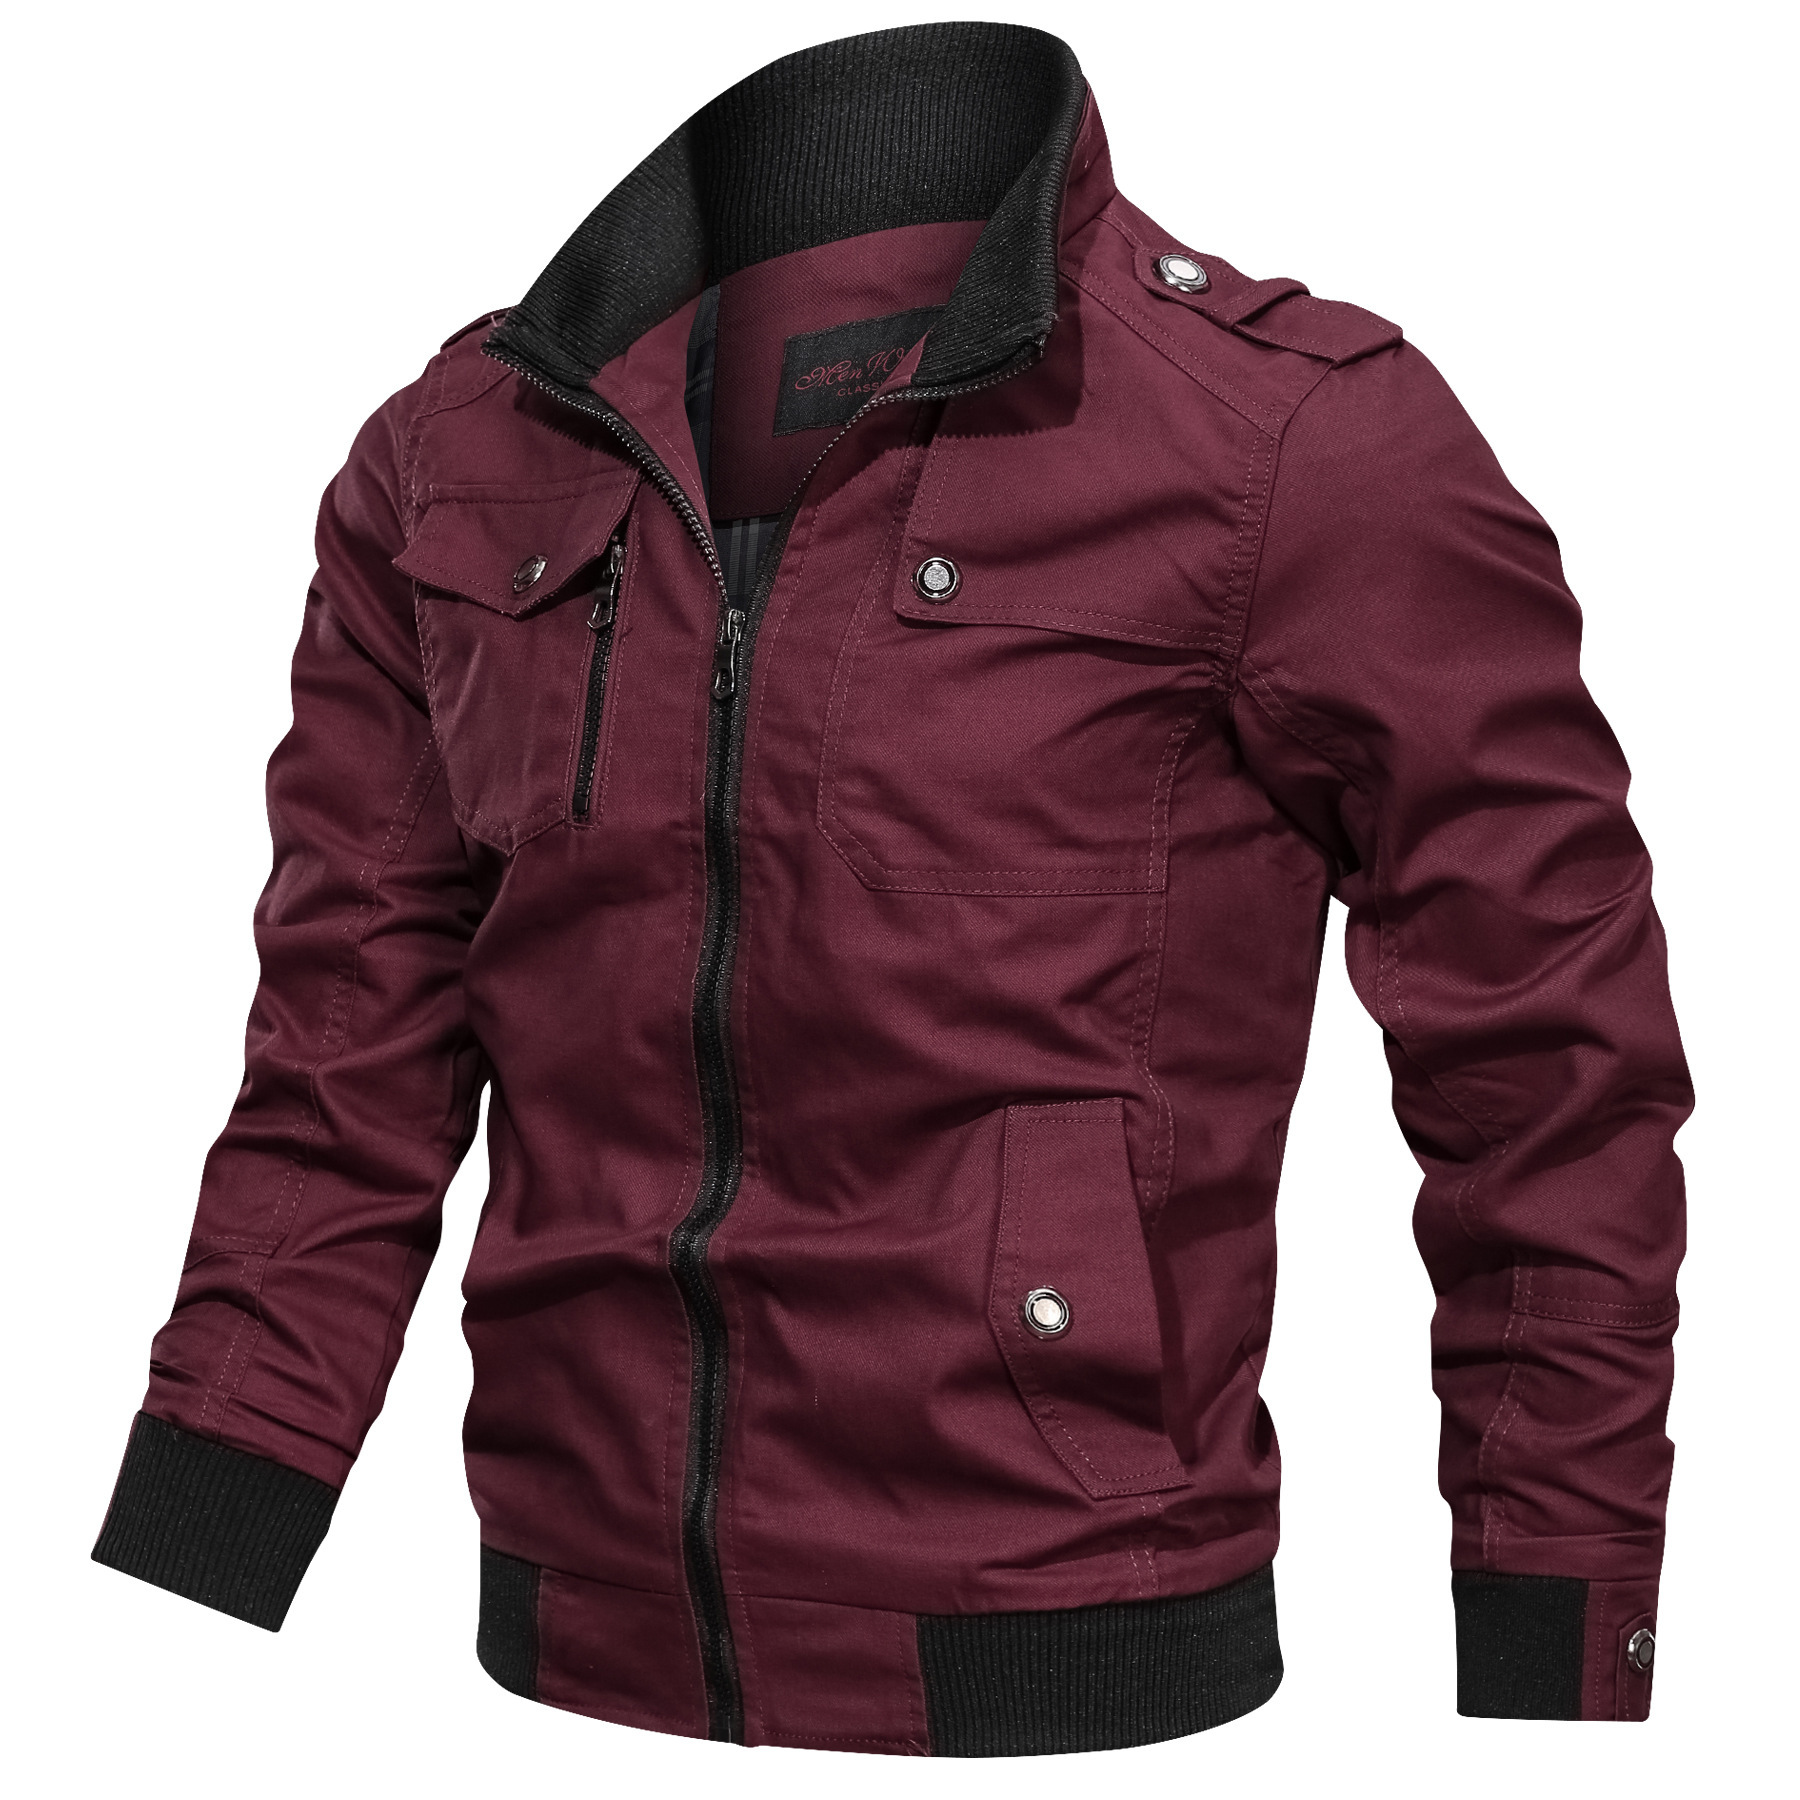 Mens outdoor cotton sports jacket